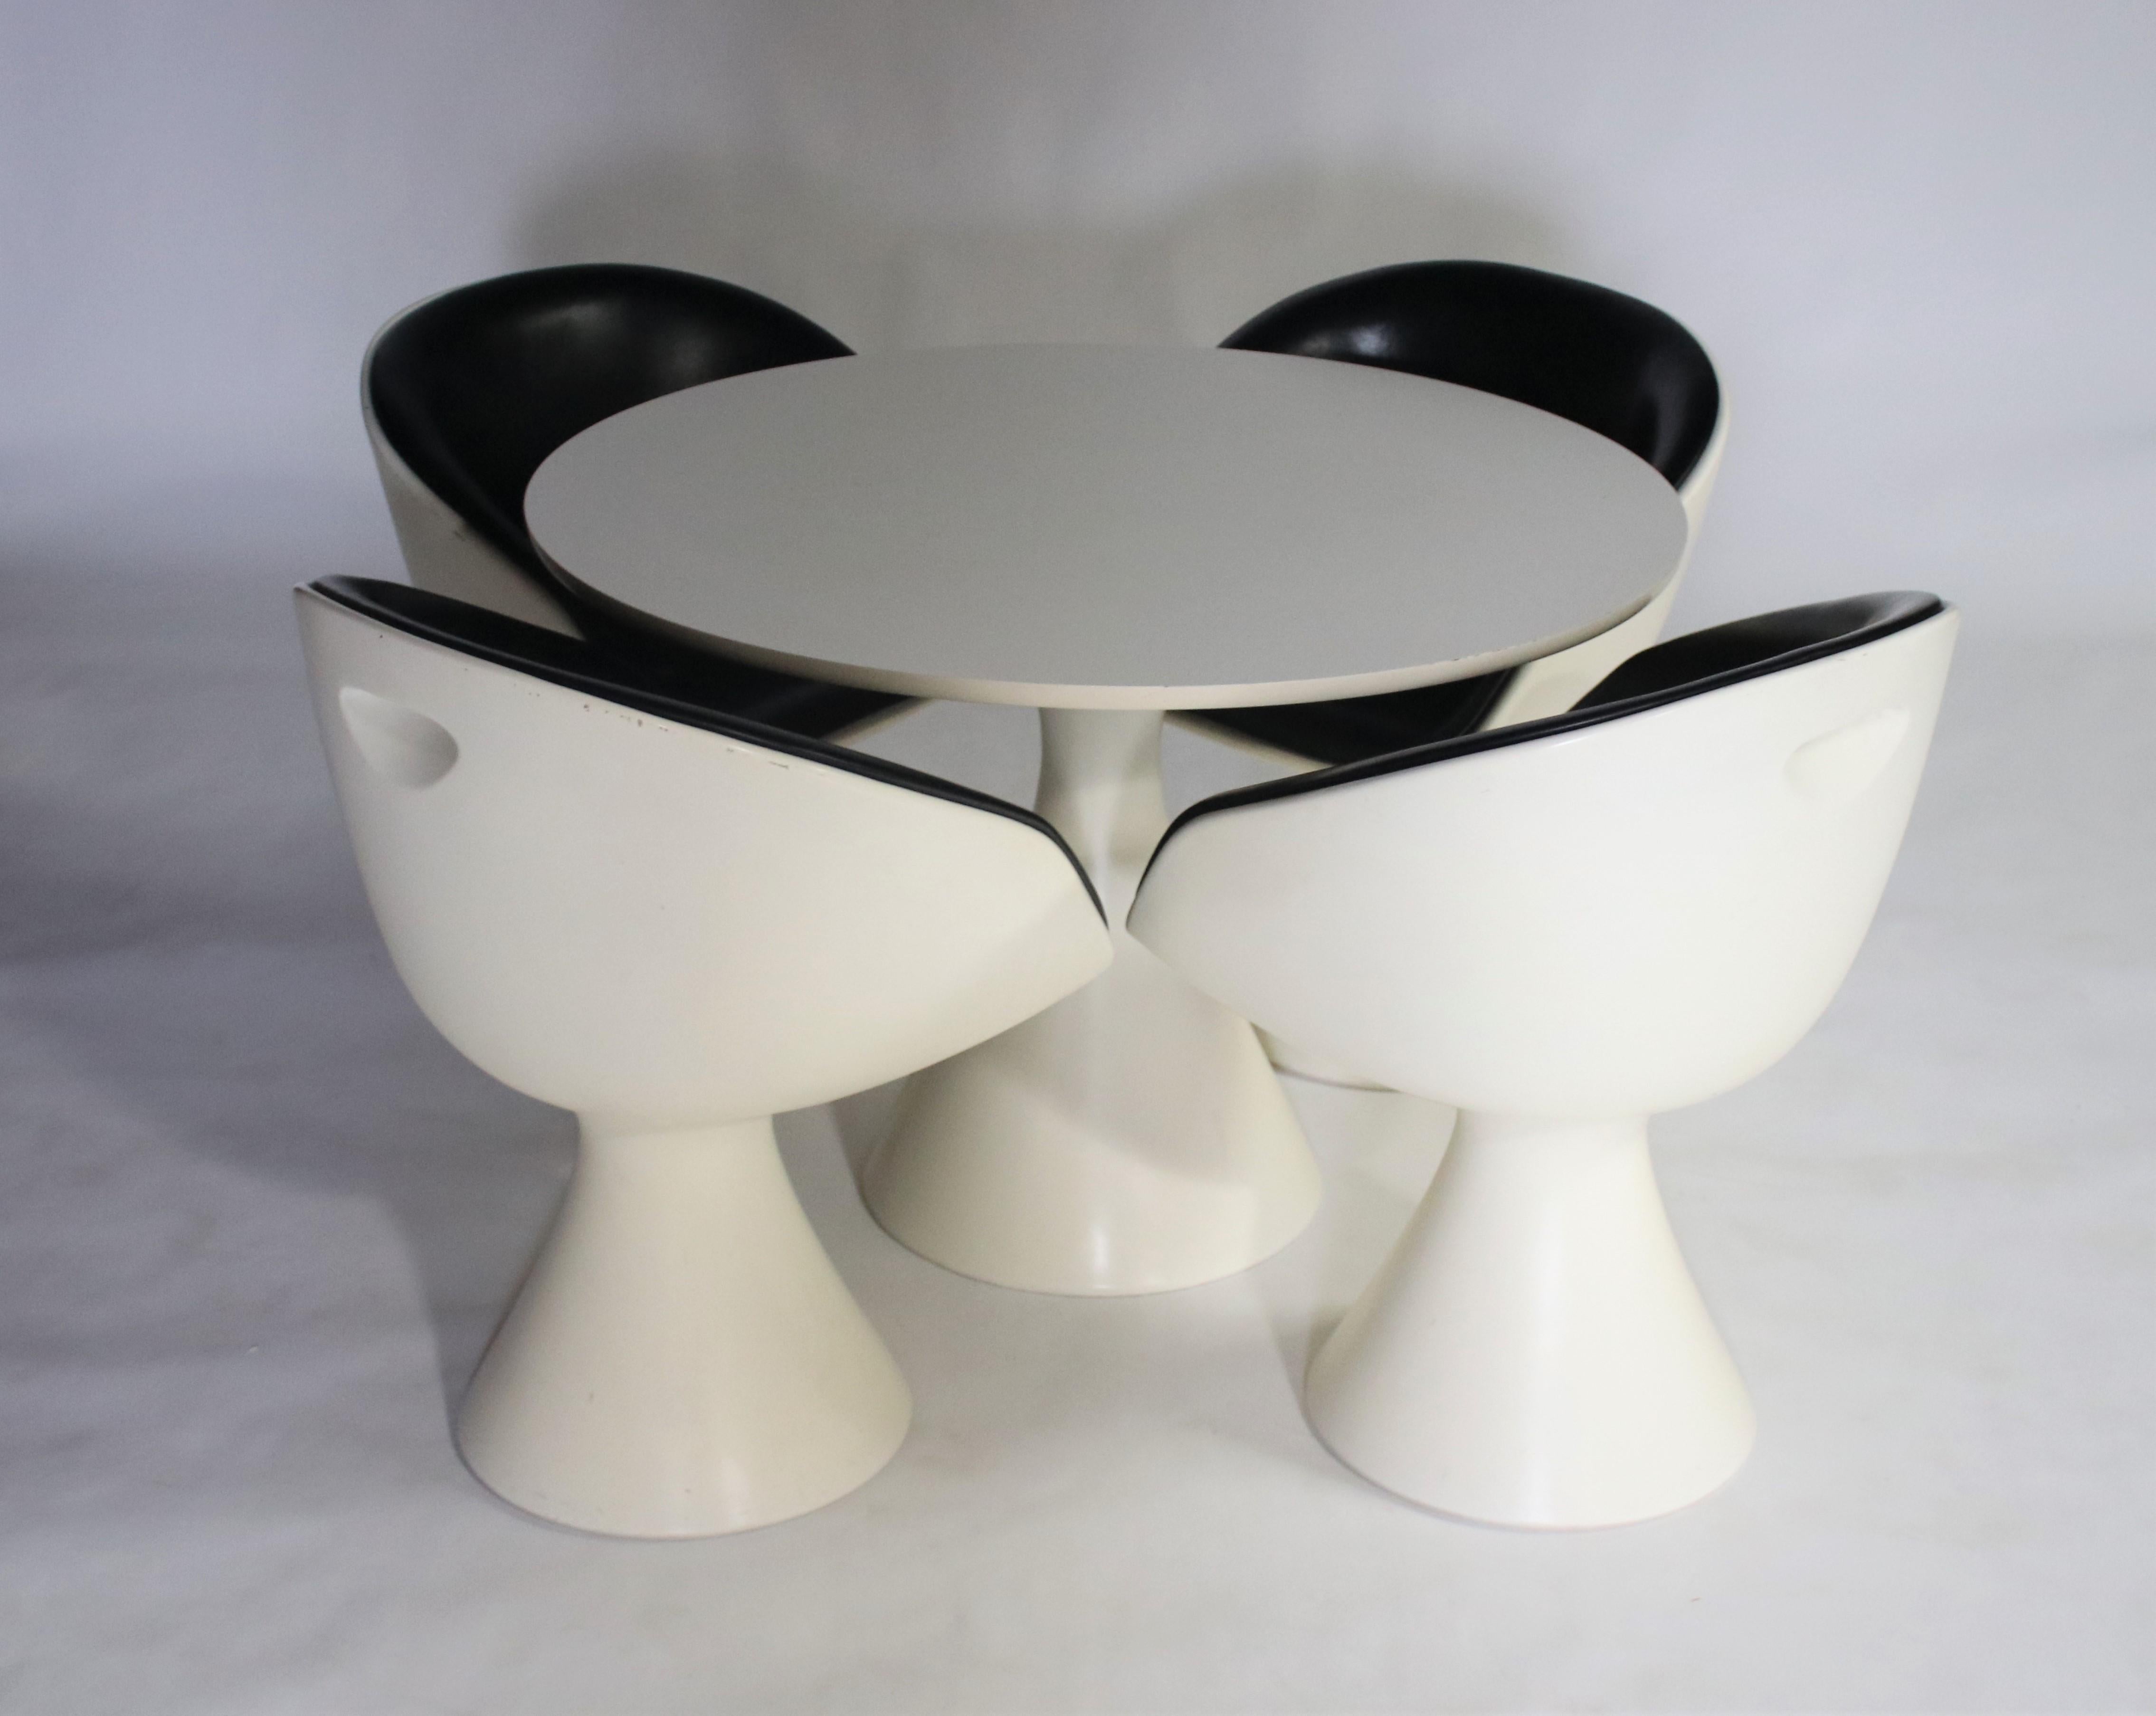 American Midcentury Space Age Modern Dining Set by Hollen, Inc